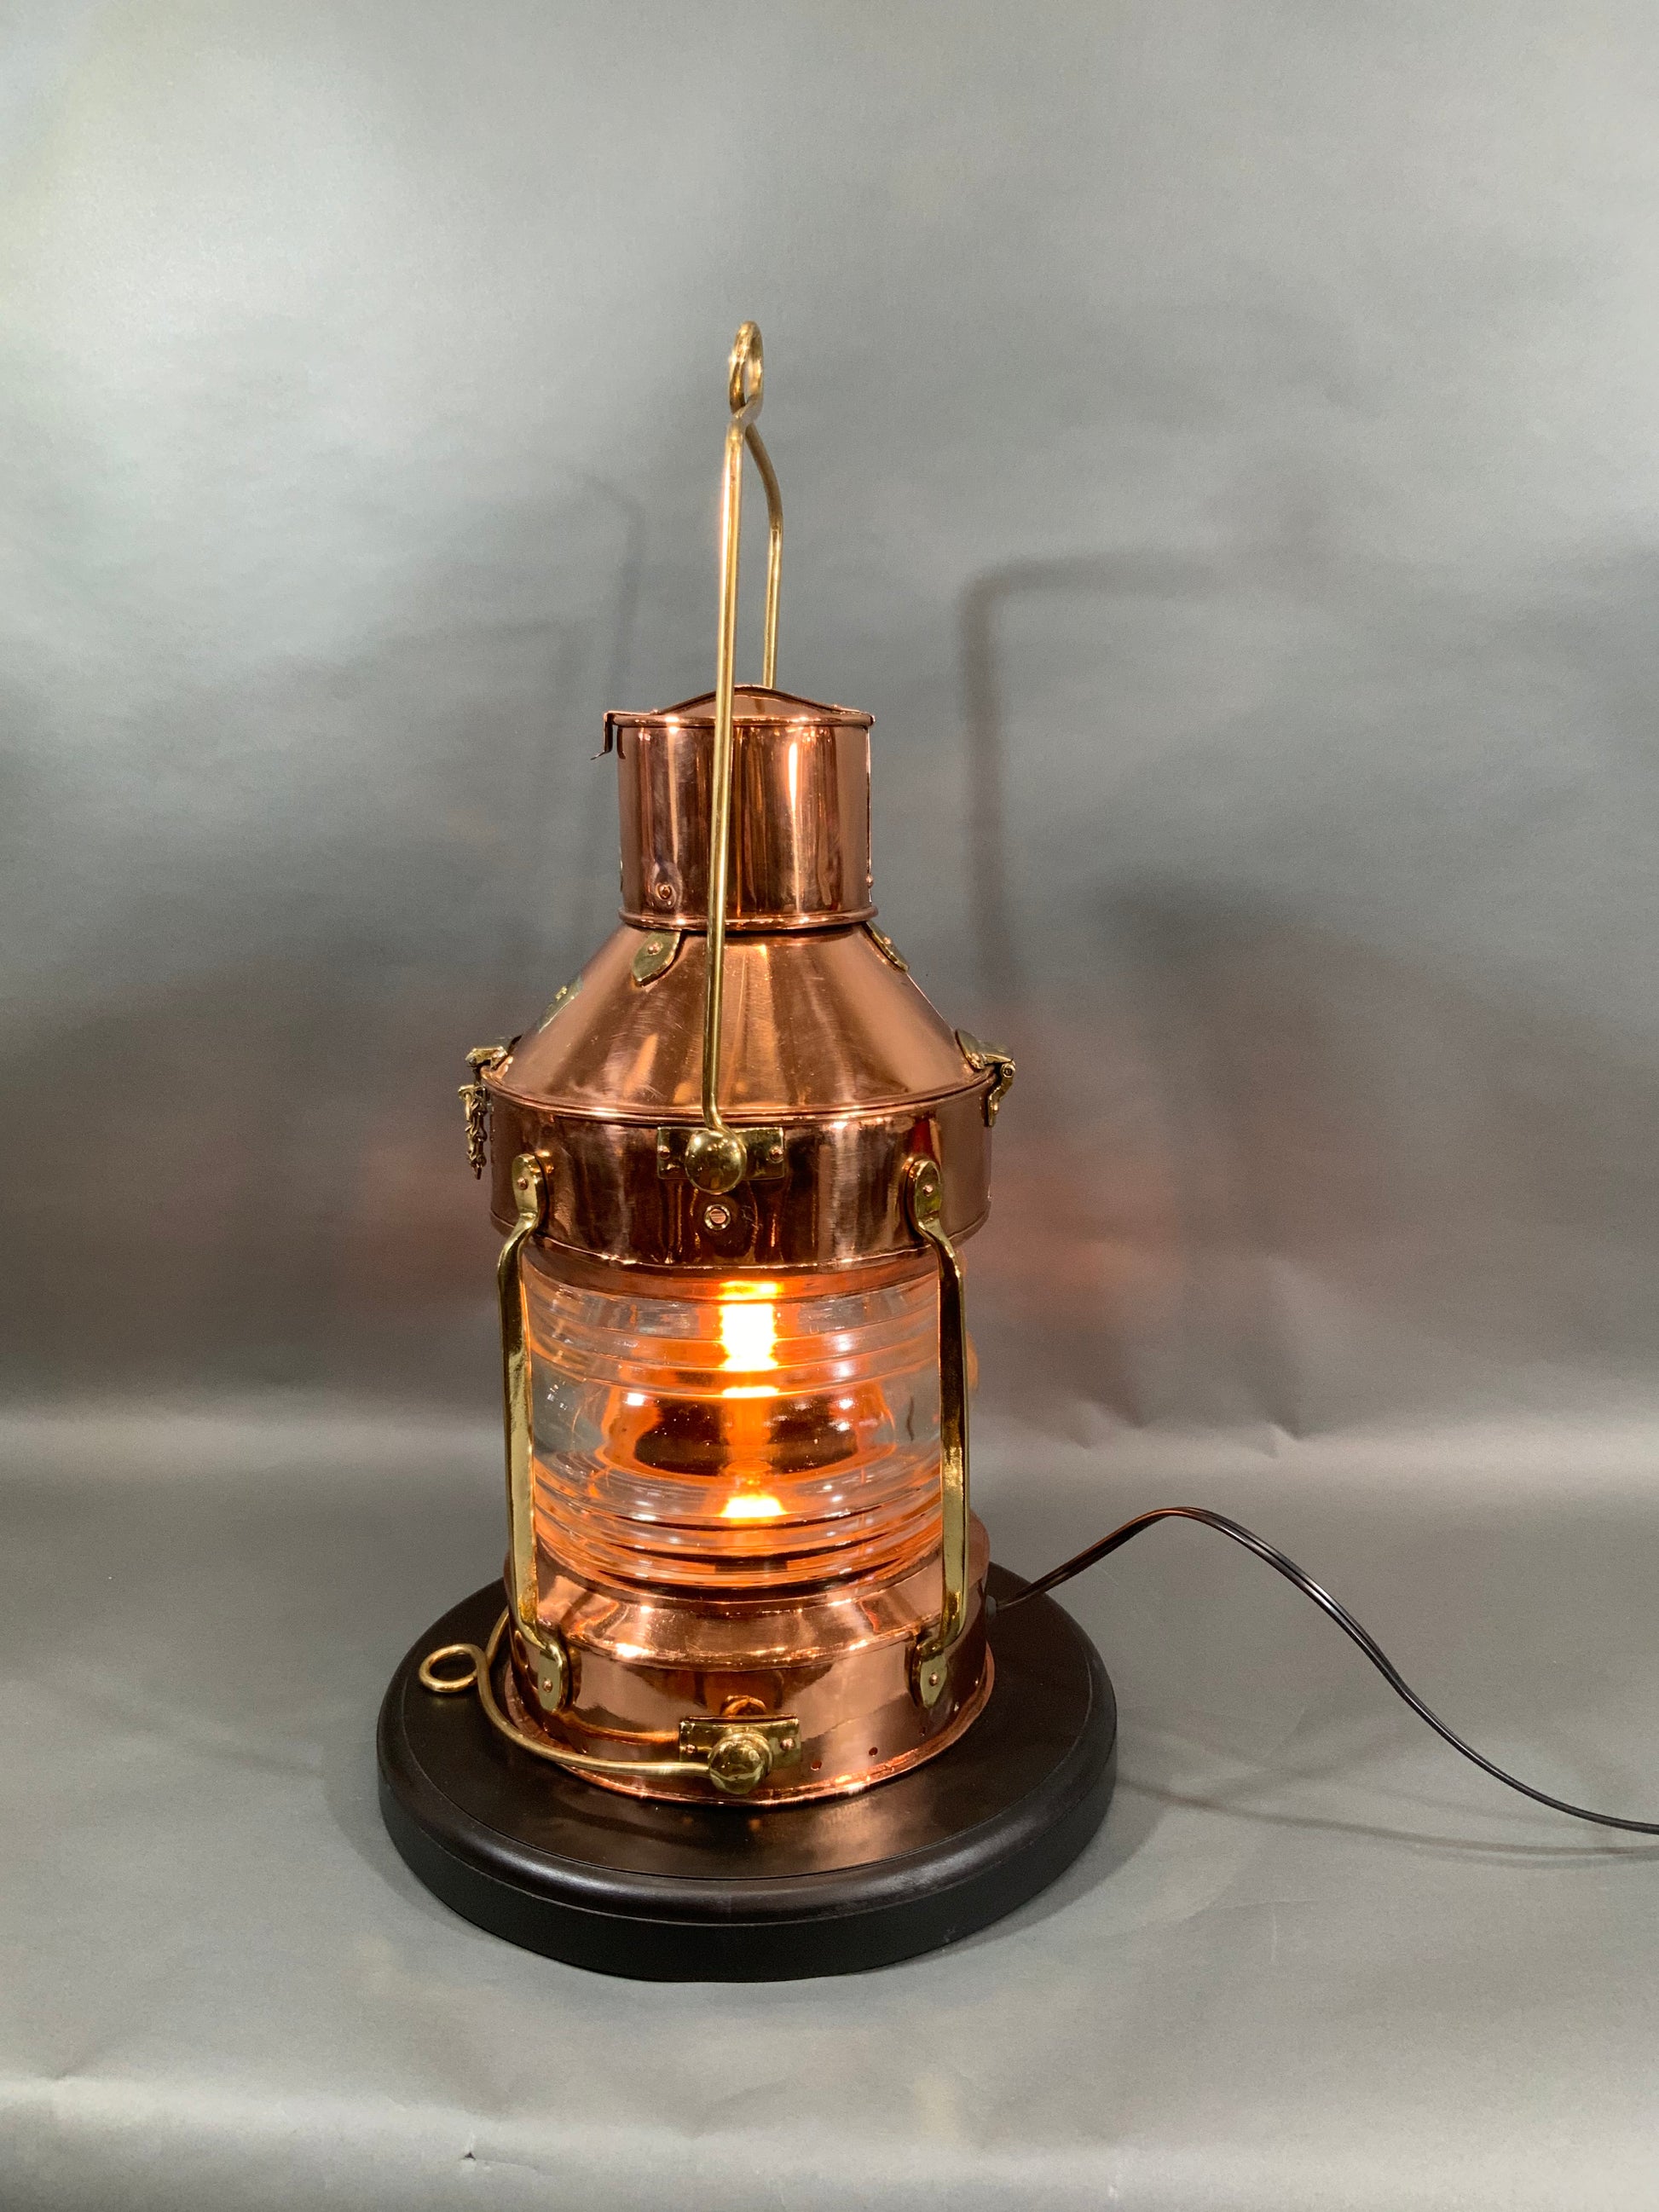 Ship's Anchor Lantern of Copper and Brass with Fresnel Glass Lens by R.C. Murray - Lannan Gallery